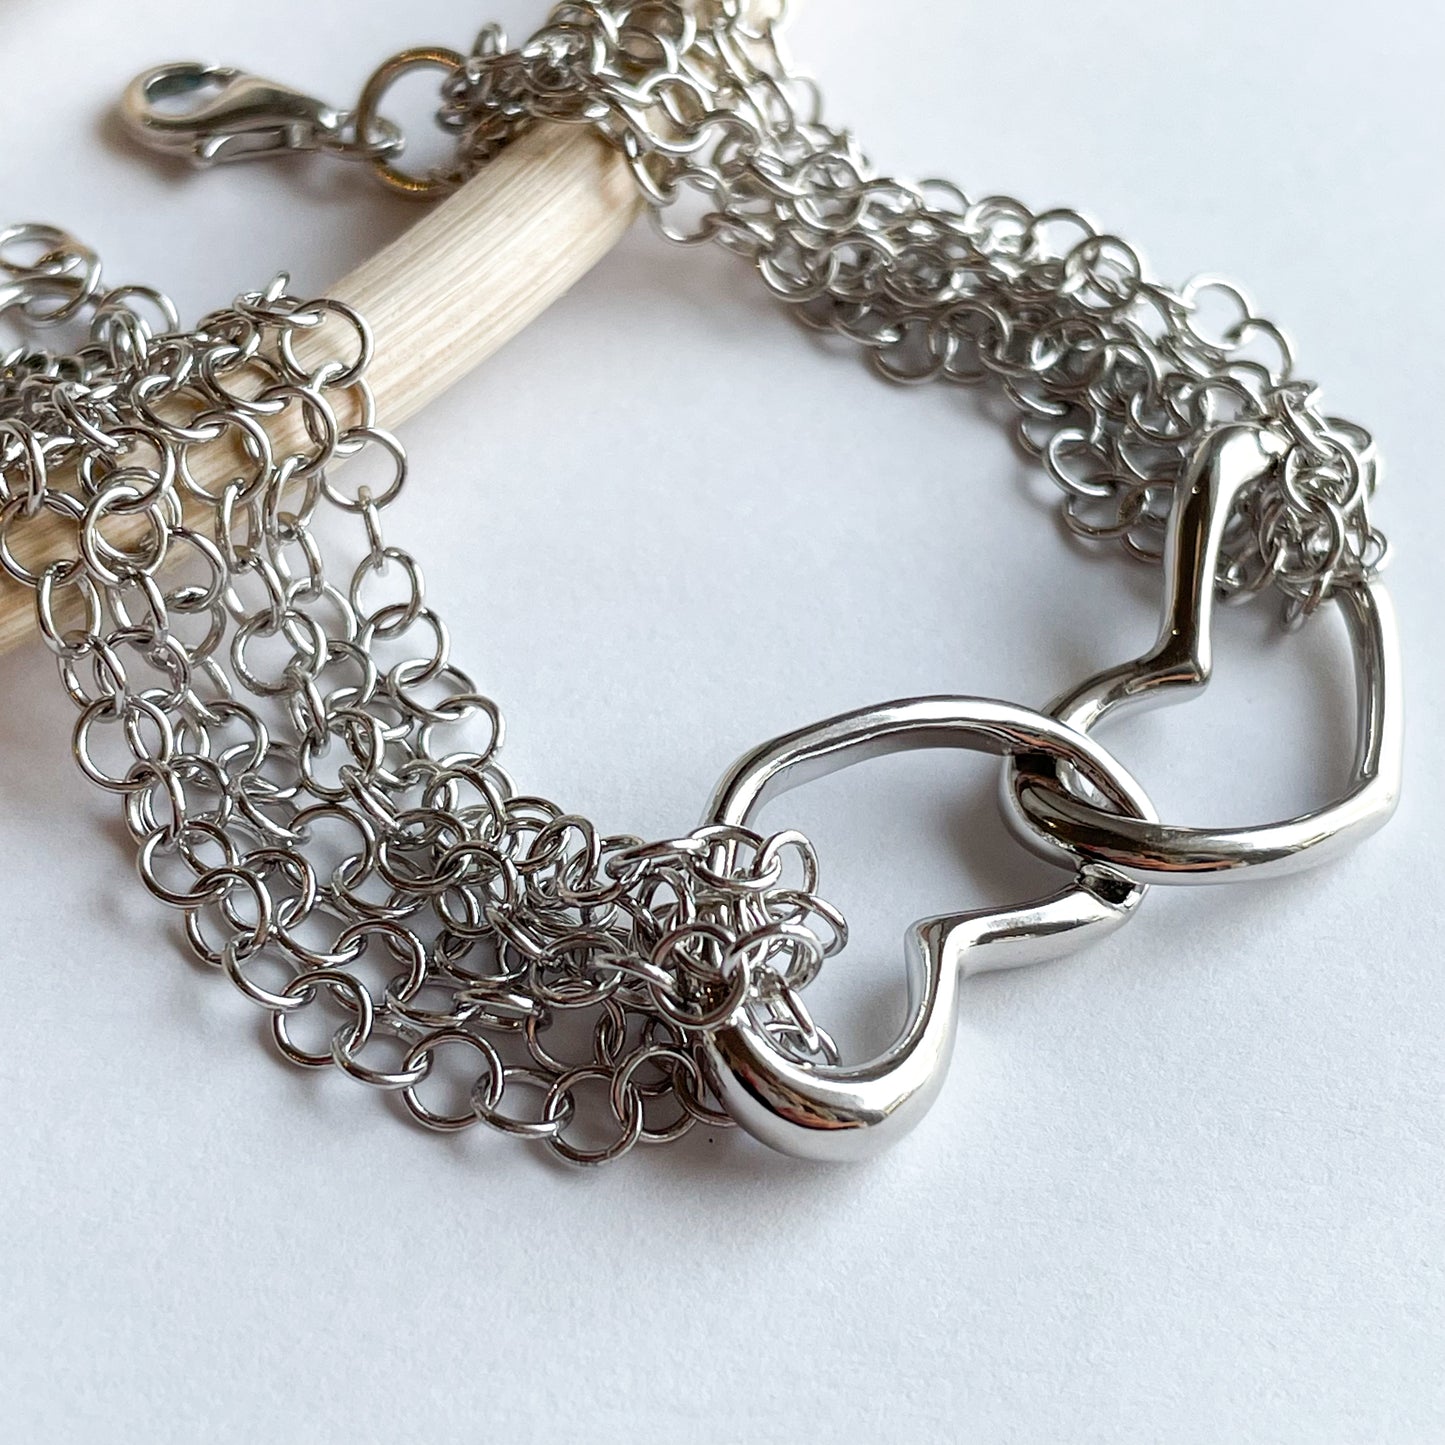 Multi Chain Heart Chunky Bracelet - Solid Sterling Silver